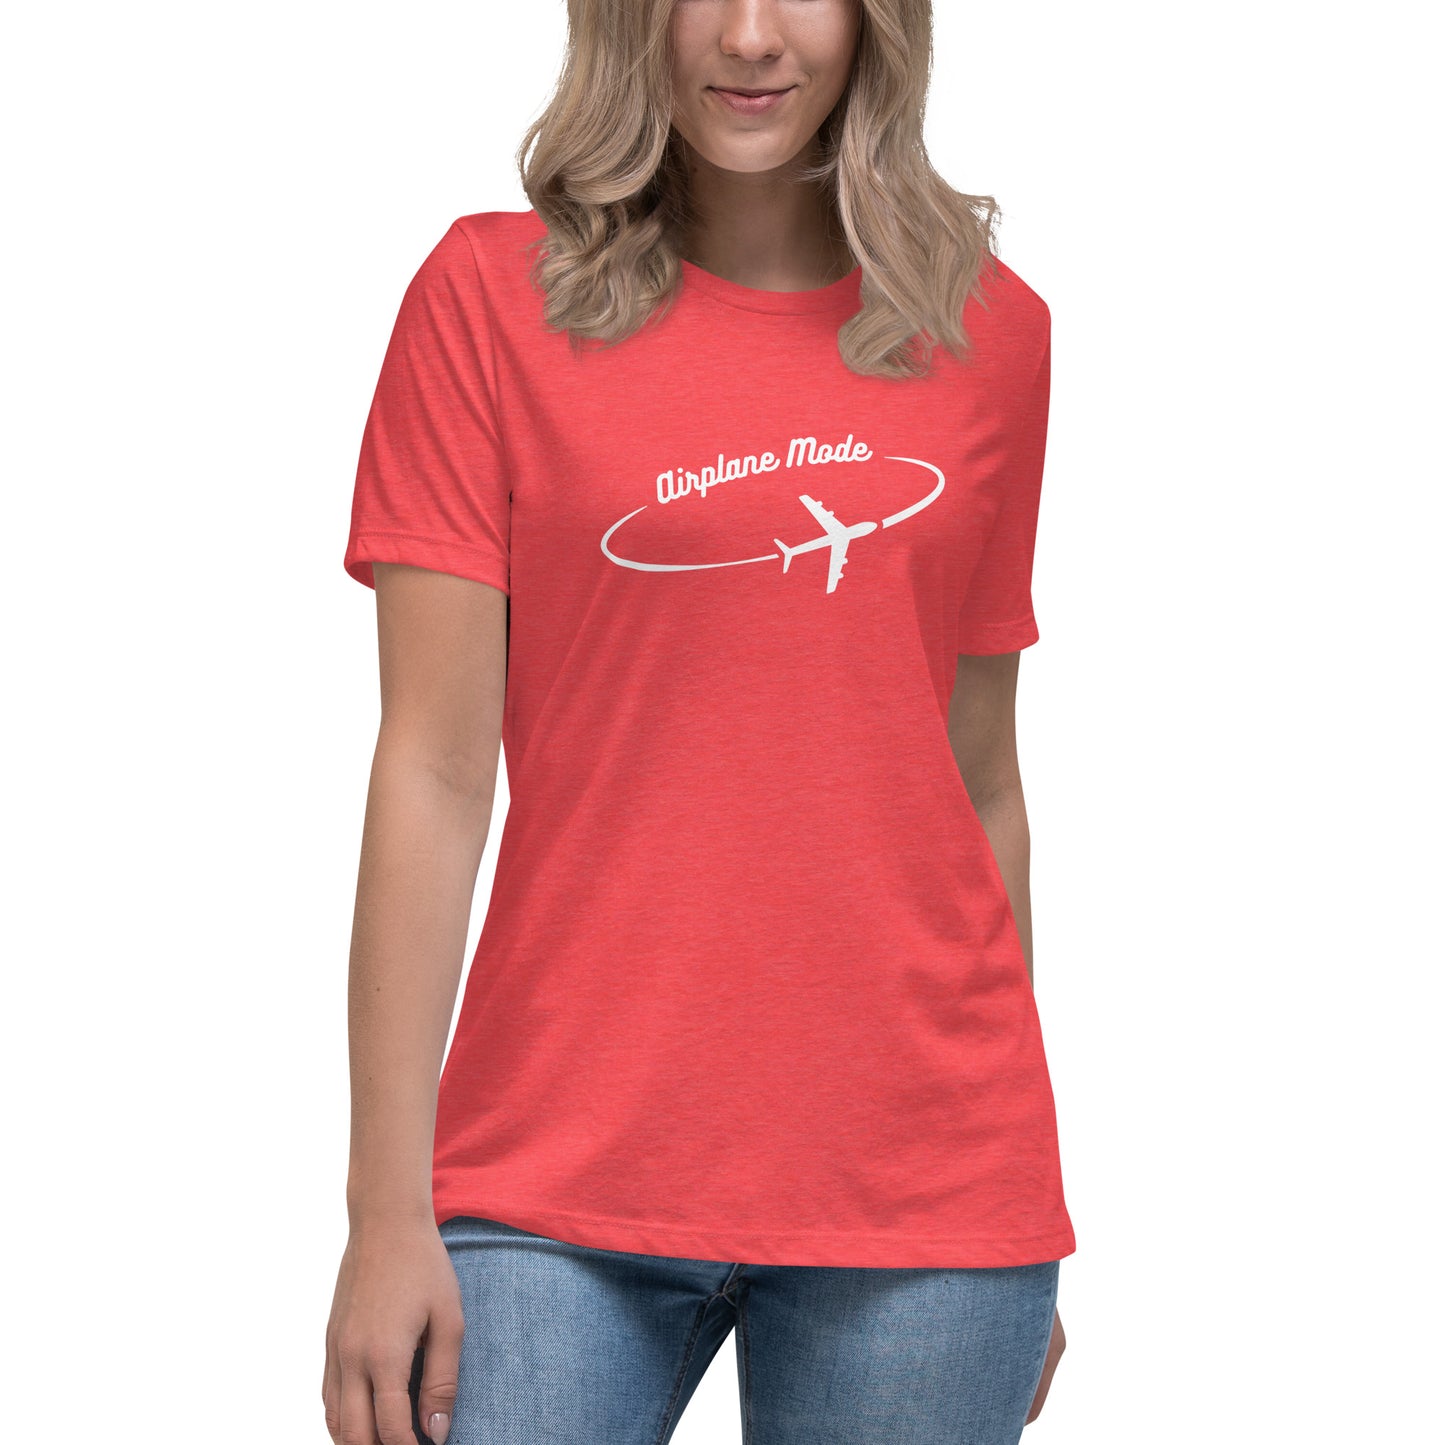 Airplane Mode - Women's Relaxed T-Shirt - White Letters